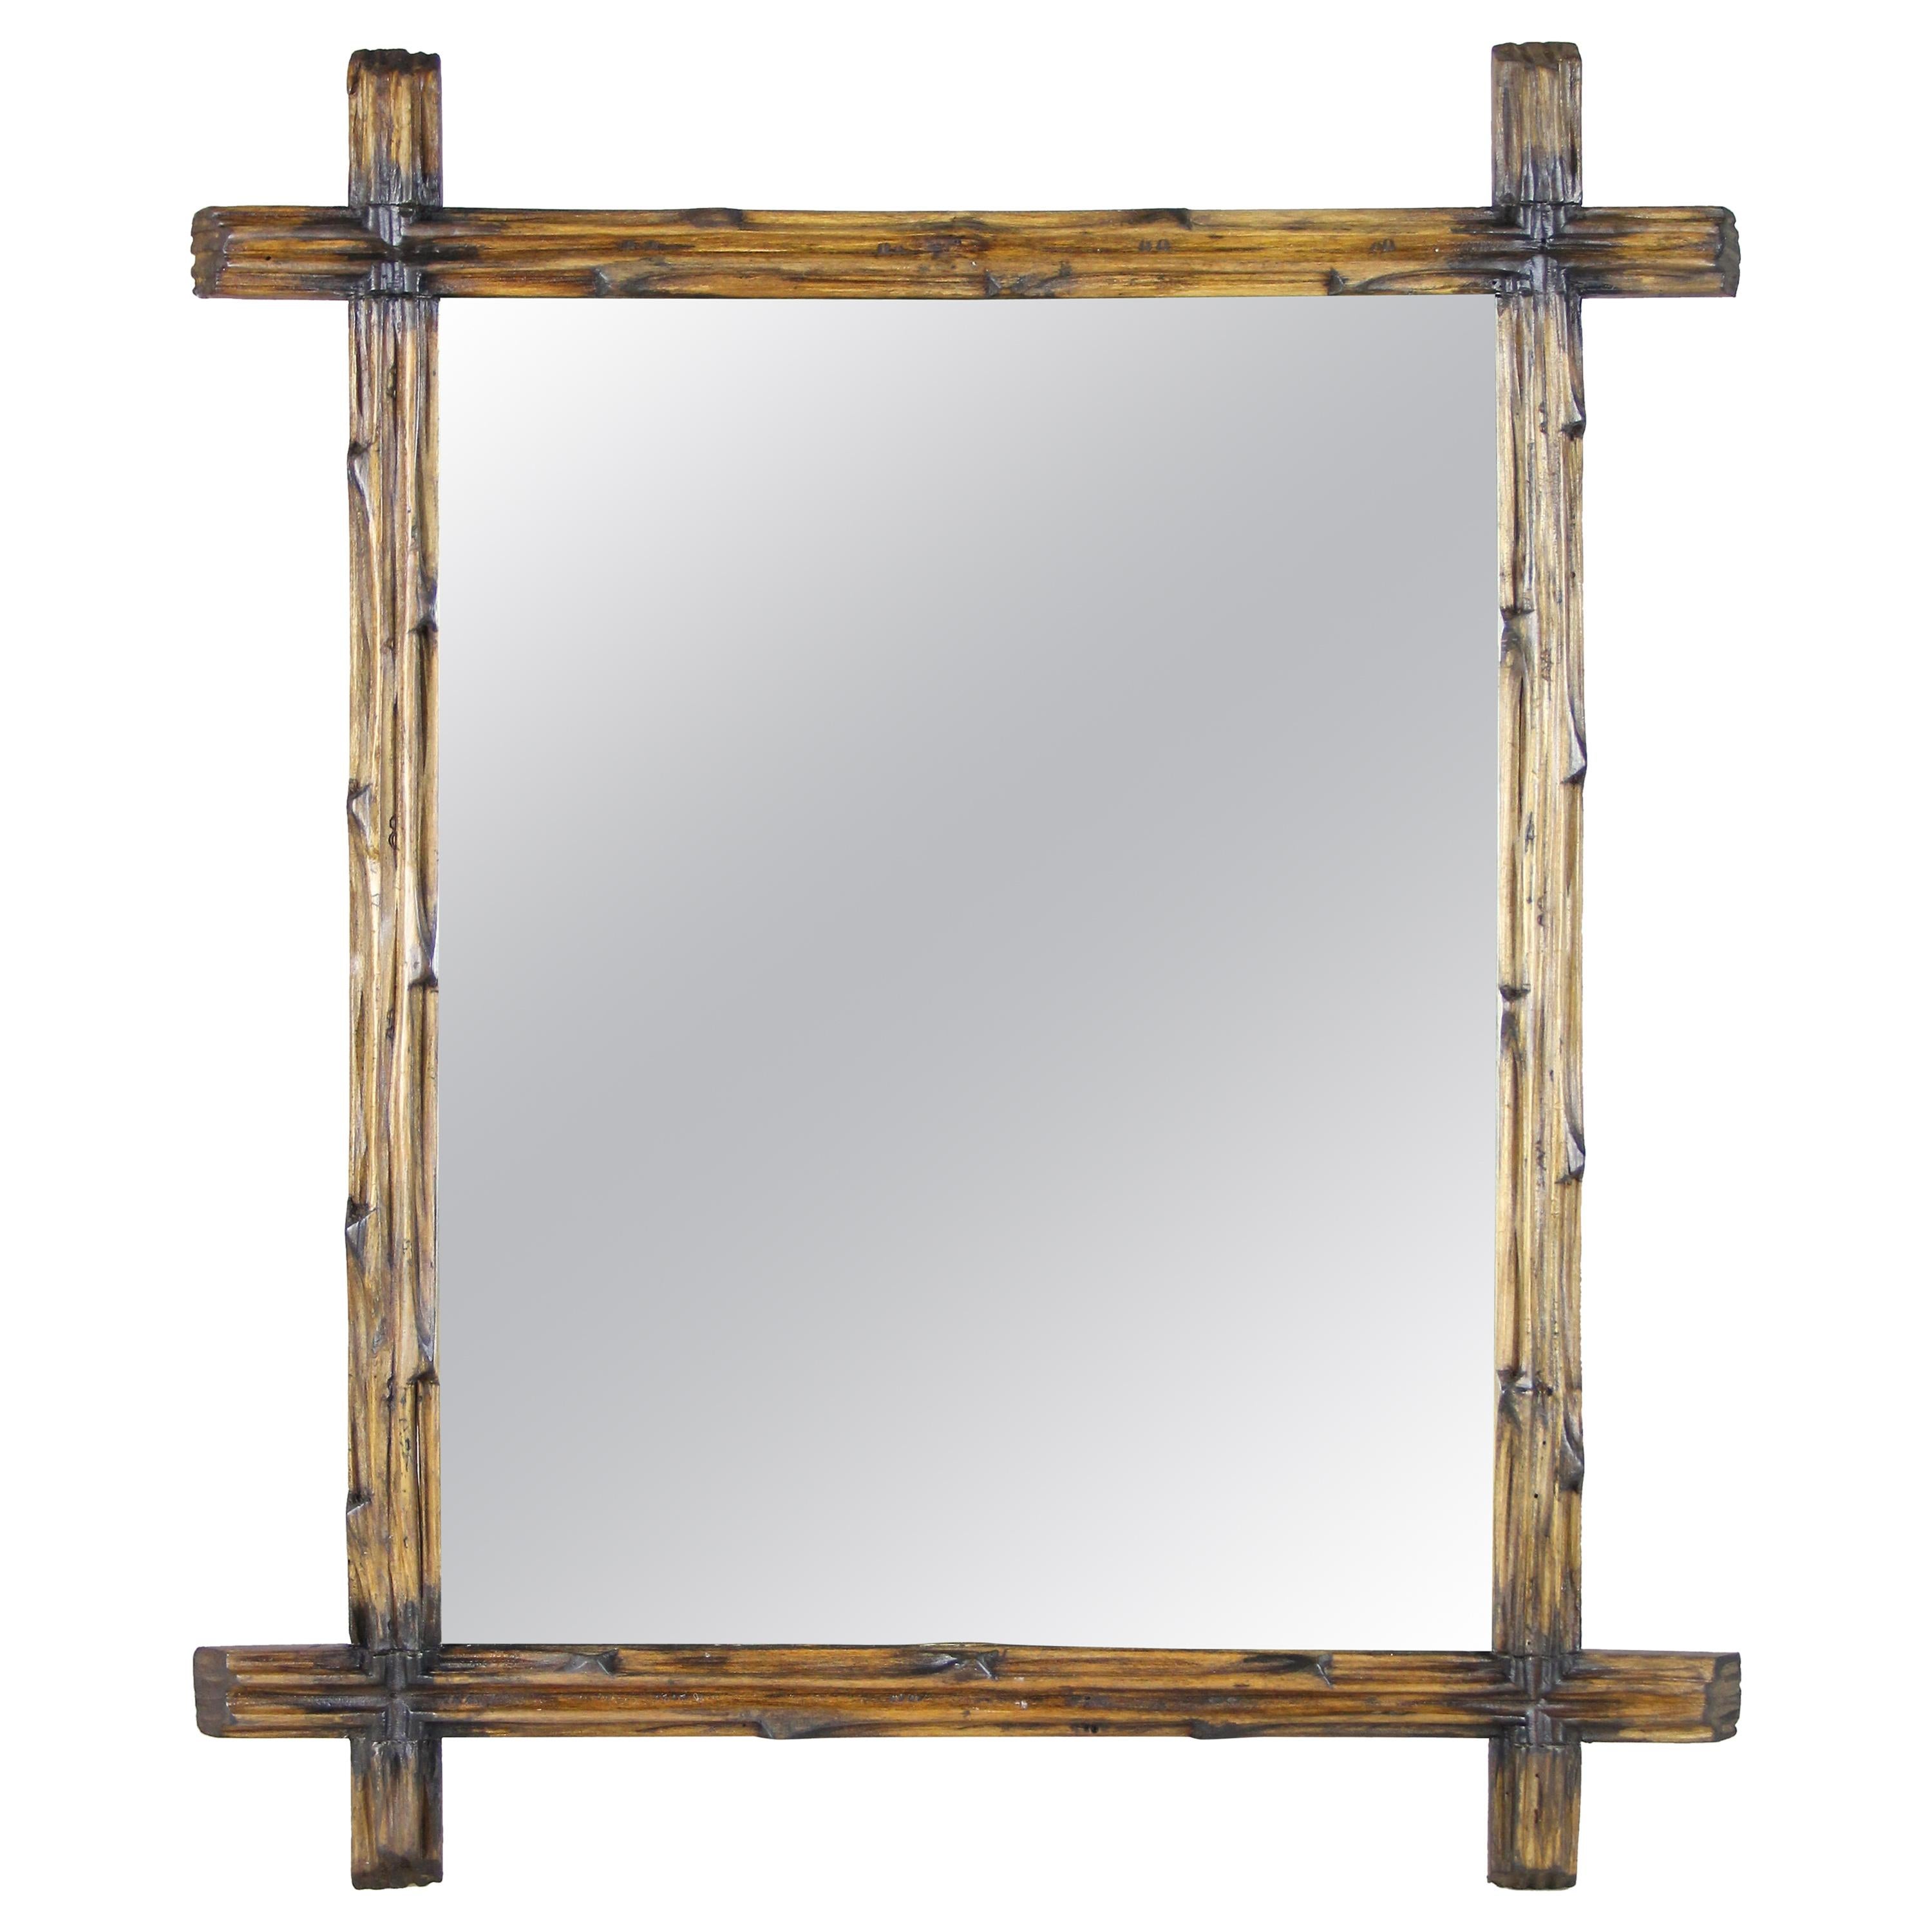 Light Brown Black Forest Wall Mirror with Blackened Accents, Austria, circa 1890